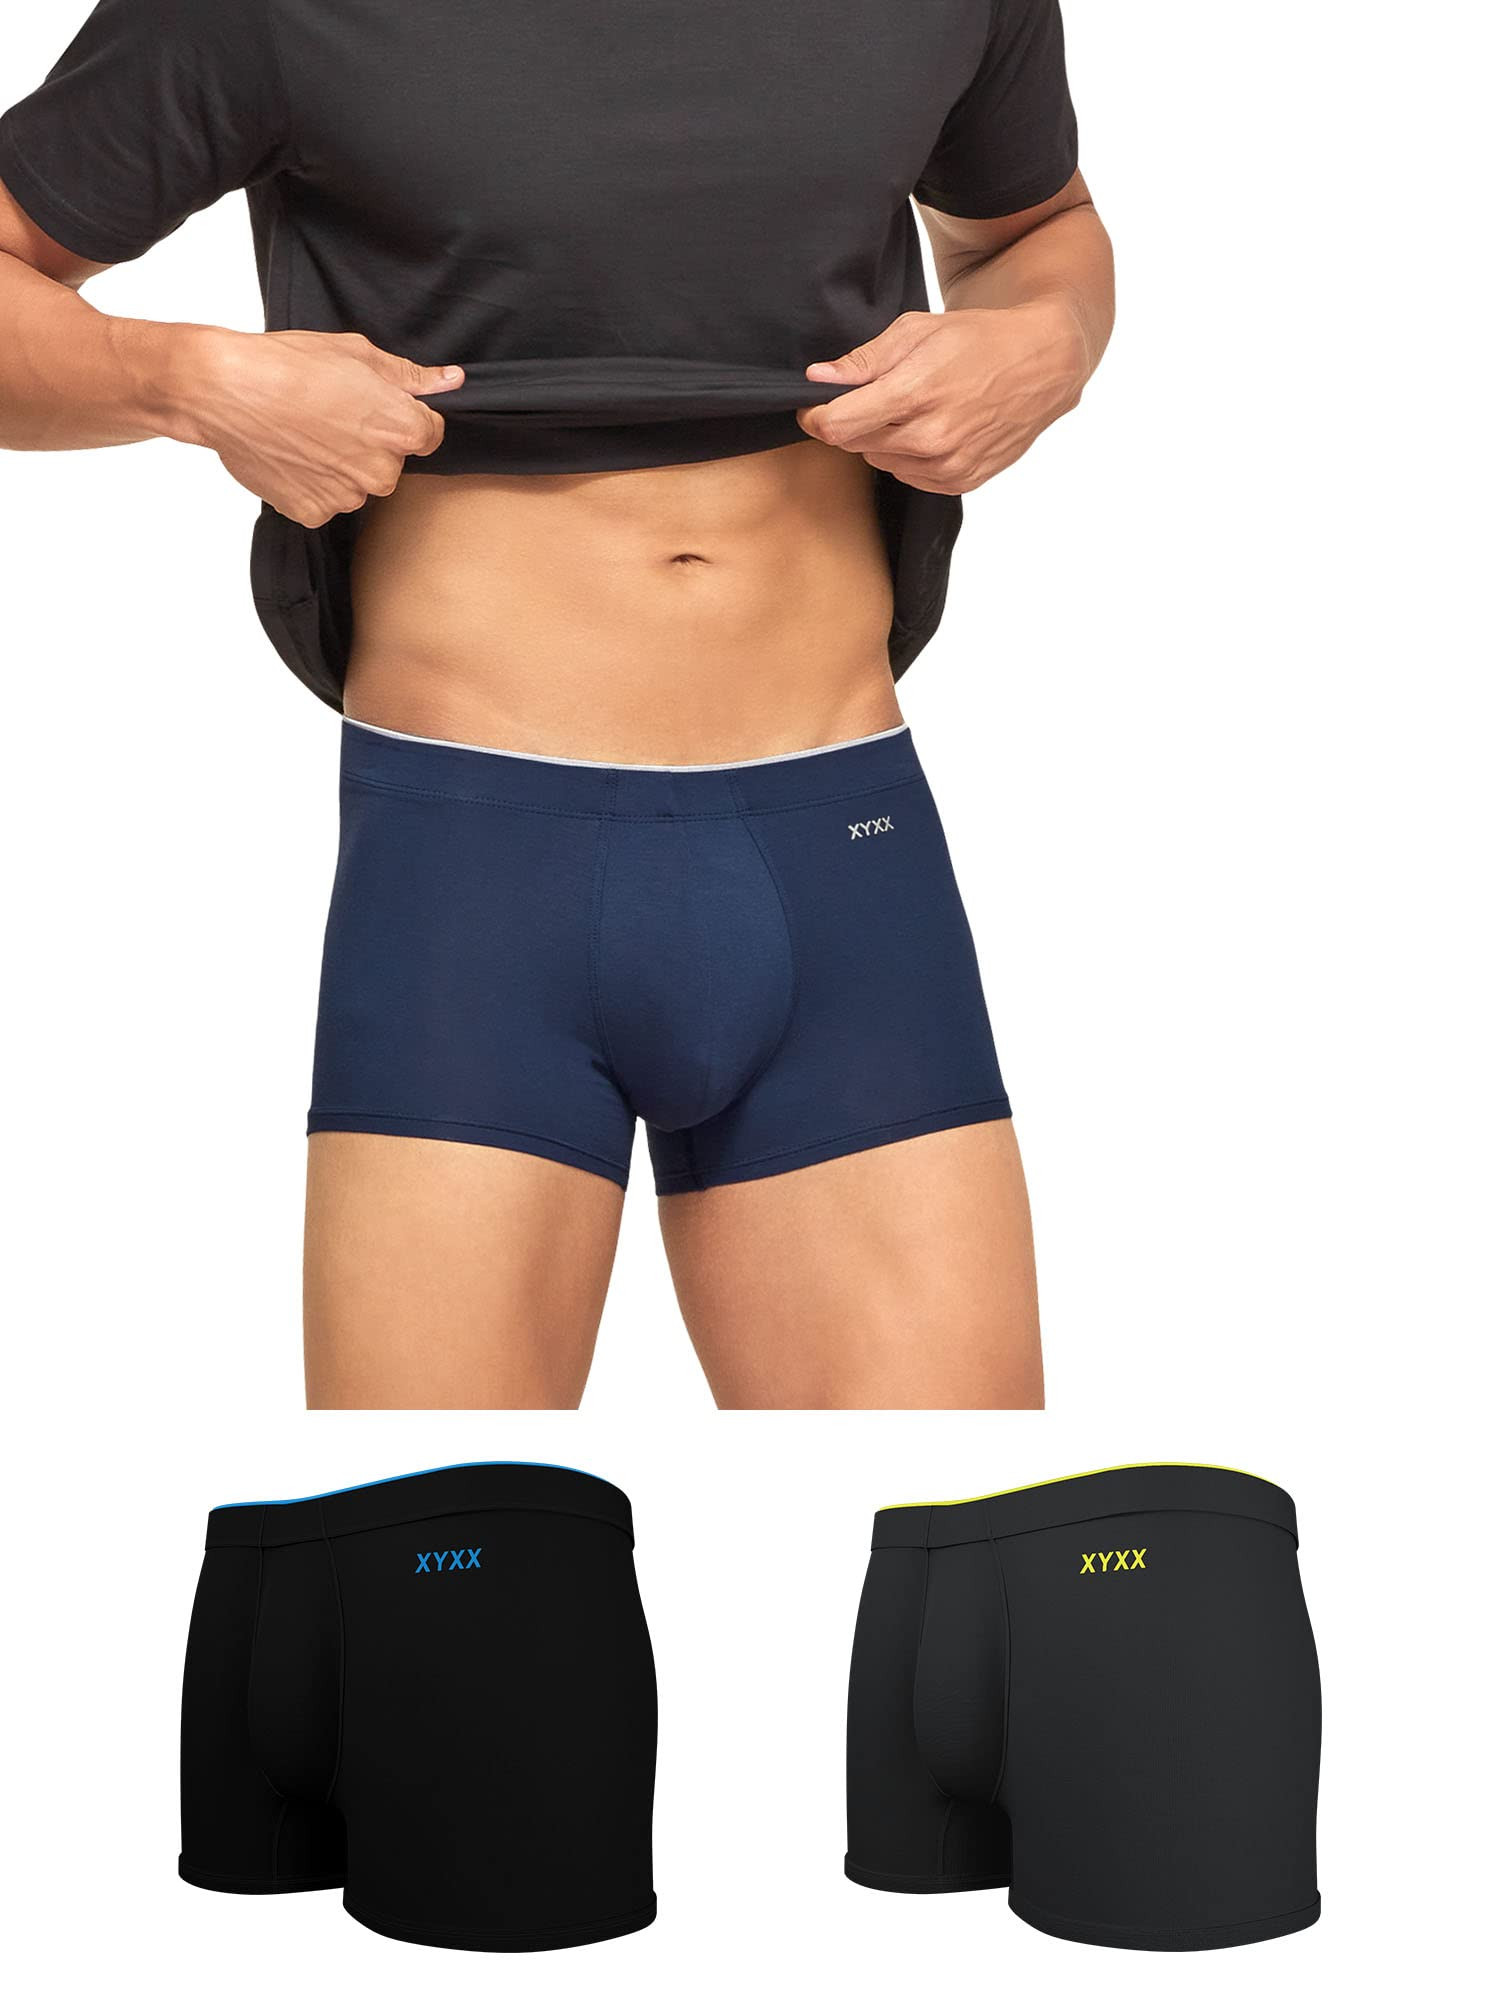 XYXX Men's Underwear Uno IntelliSoft Antimicrobial Micro Modal Trunk Pack  of 3 (Dress Blue ; Coral Grey ;